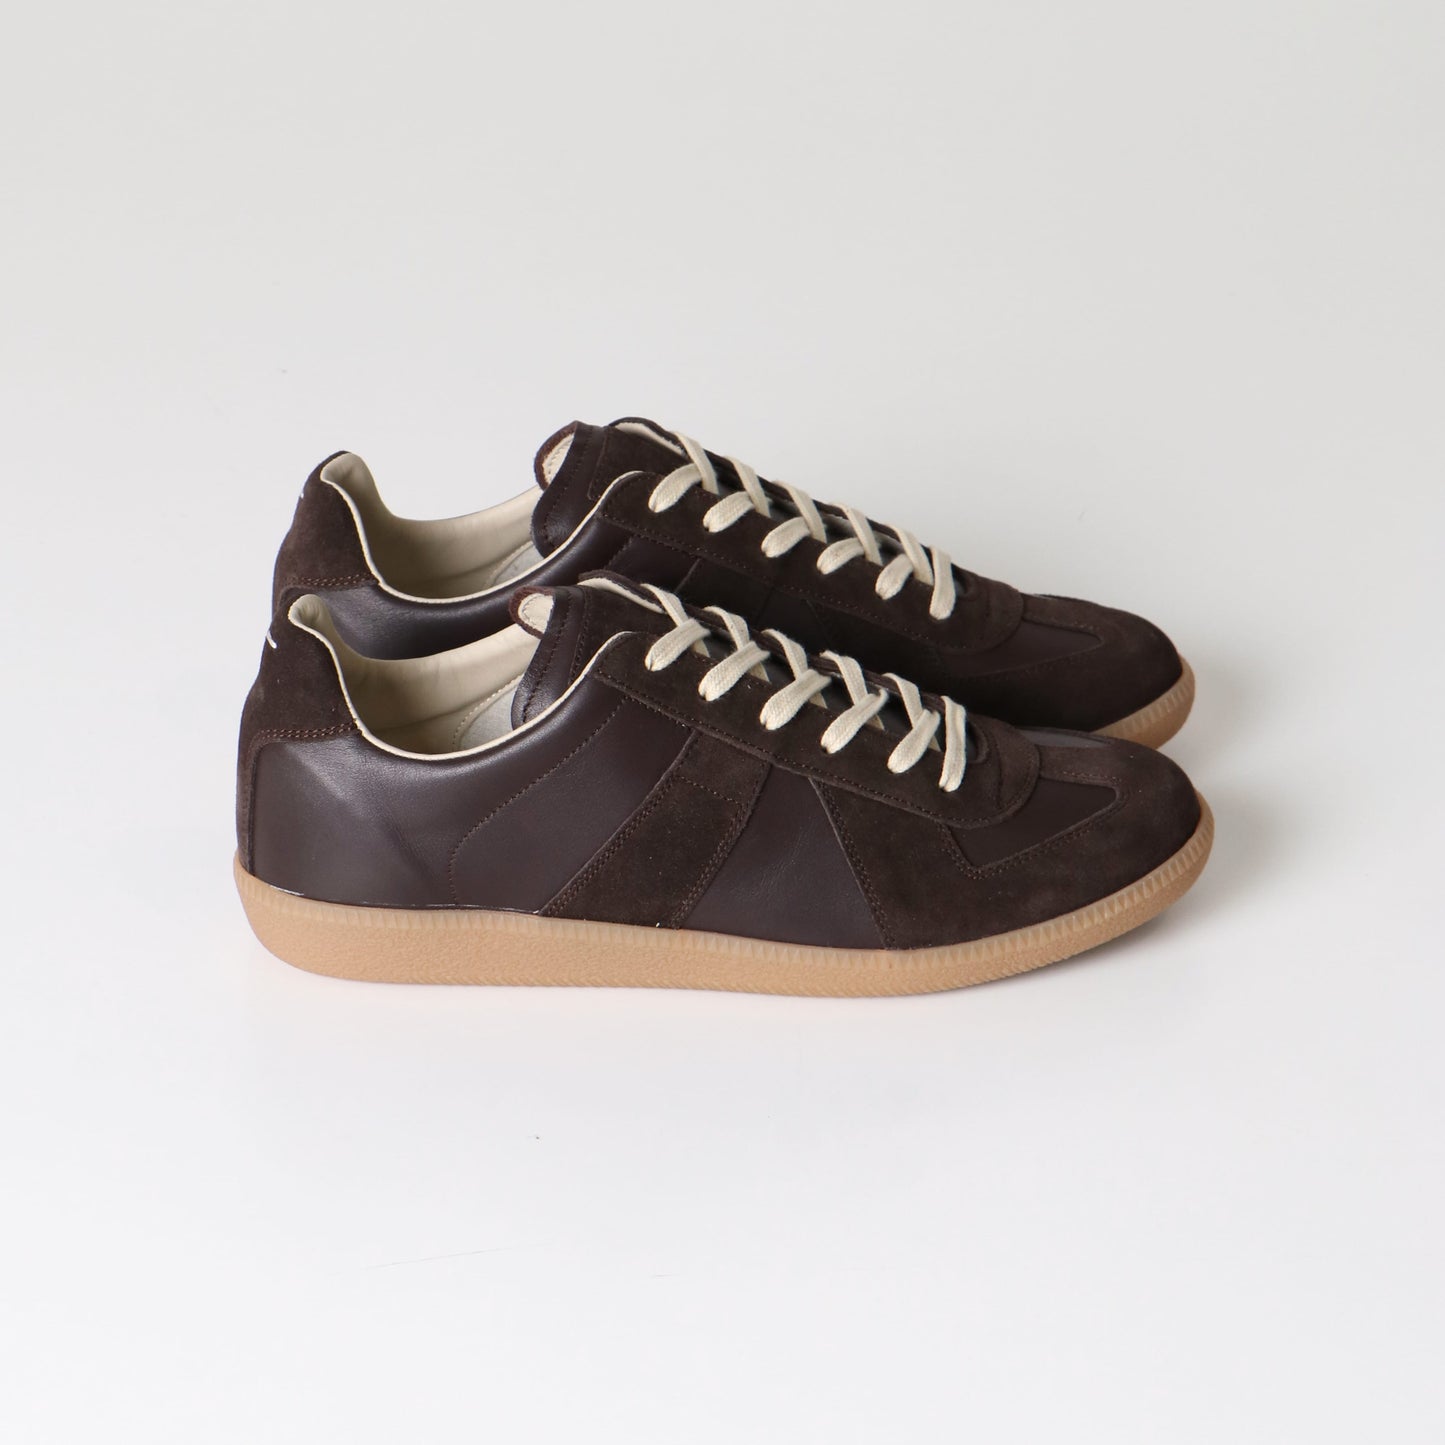 S57WS0236 "REPLICA" SHOES BROWN